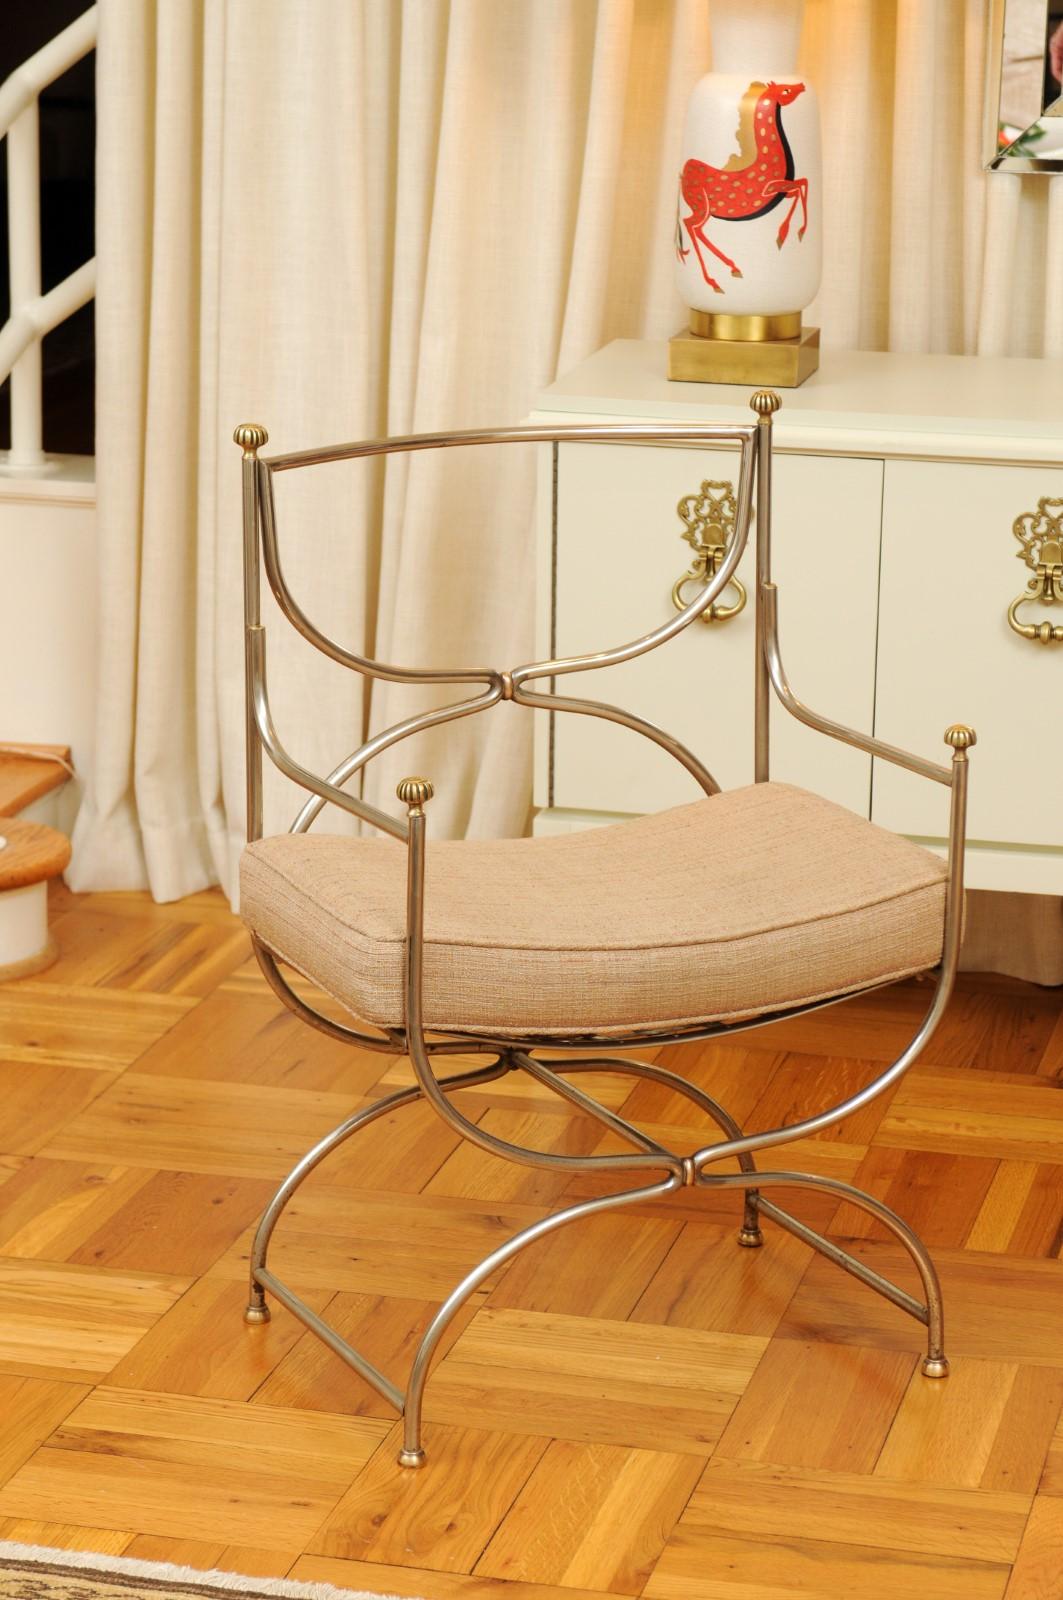 French Breathtaking Set of 6 Polished Steel and Brass Chairs by Maison Jansen, 1965 For Sale